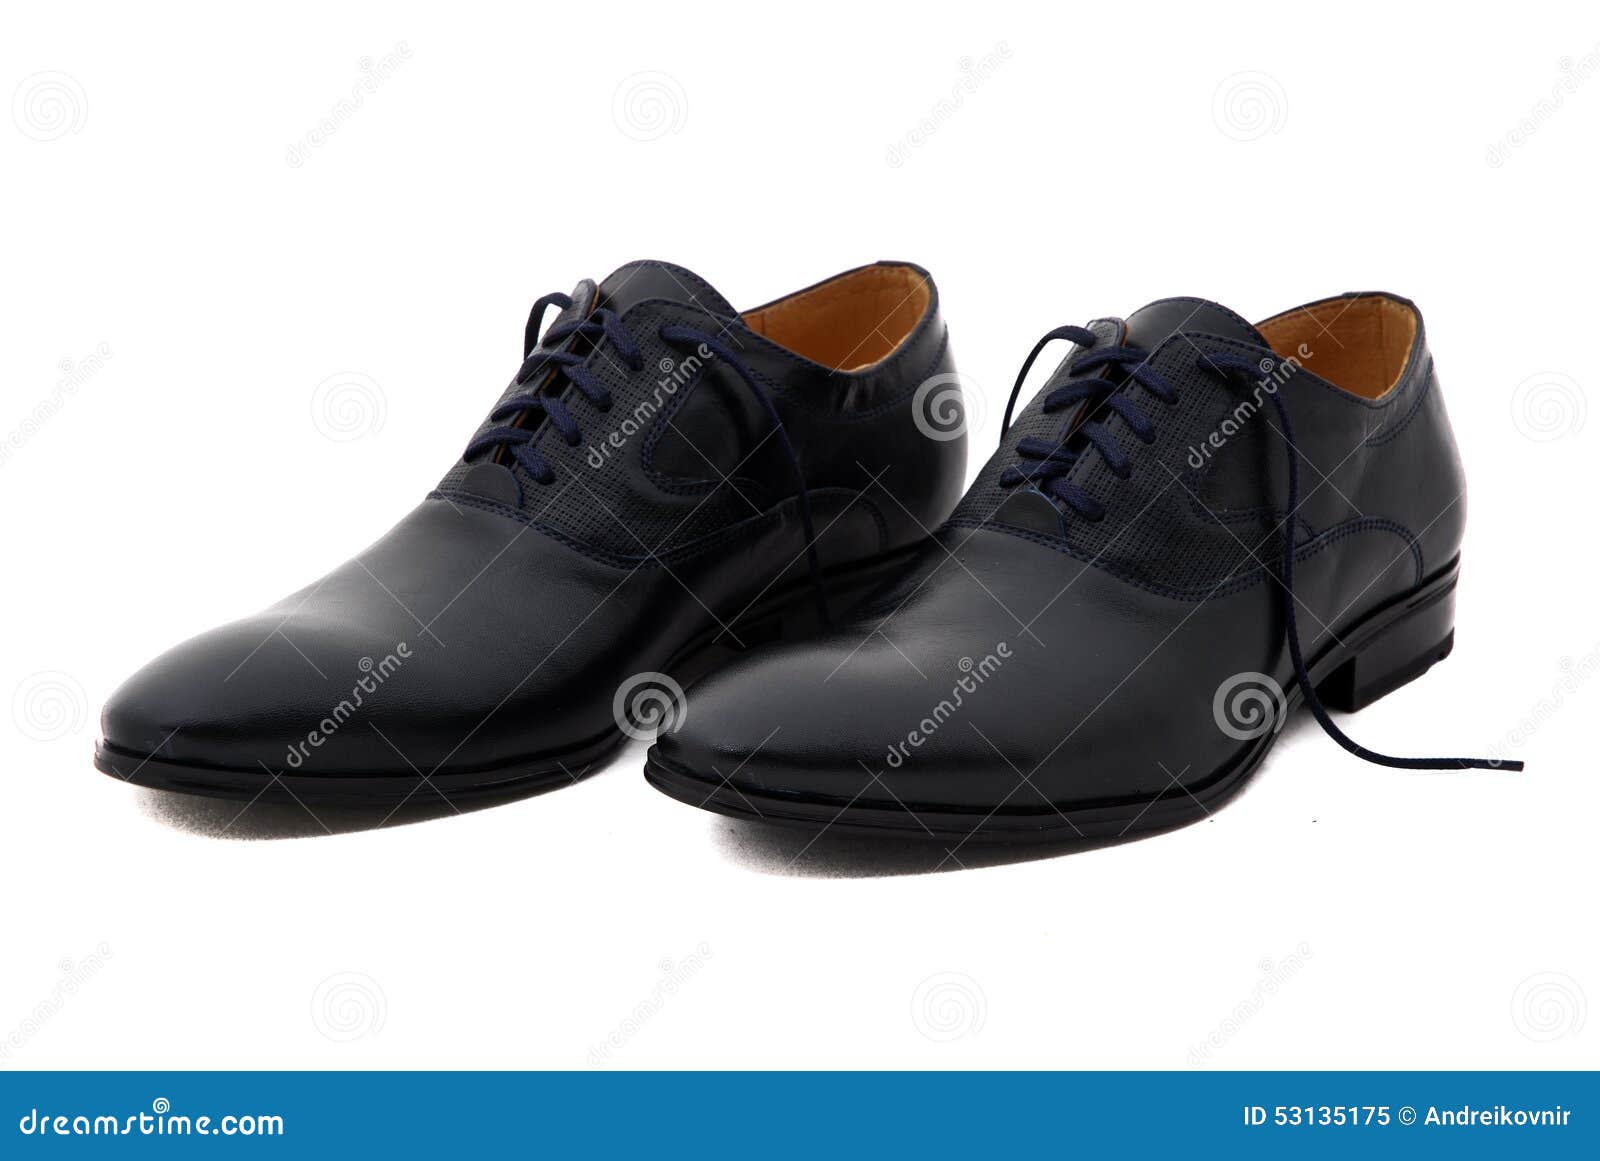 Black Patent Leather Men Shoes Isolated on White Stock Image - Image of ...